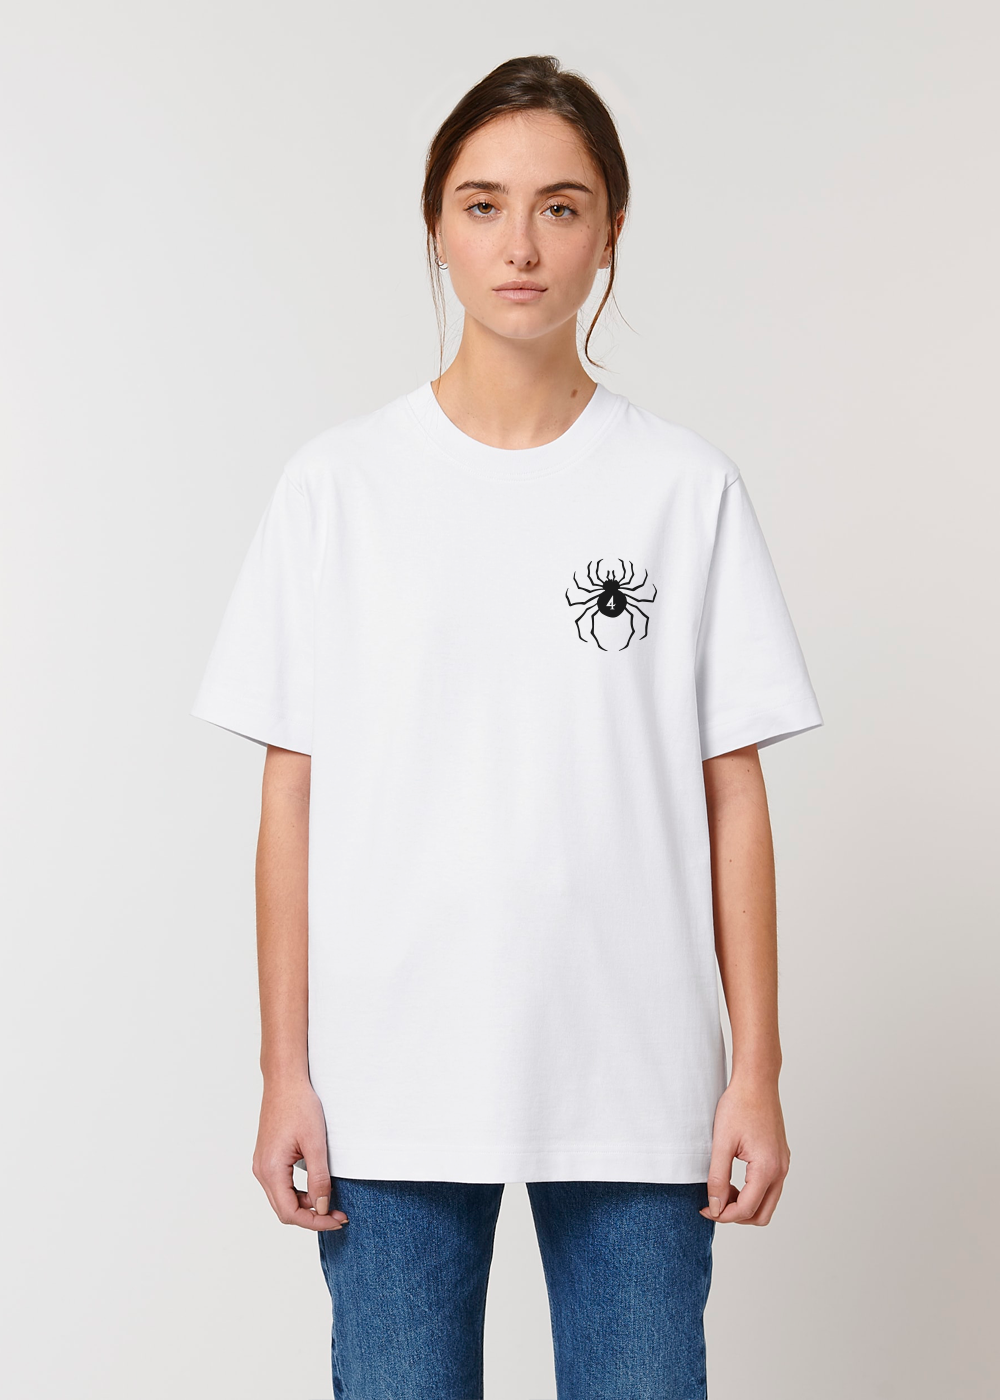 MADE IN JAPAN - THE MAGICIAN® WHITE TEE